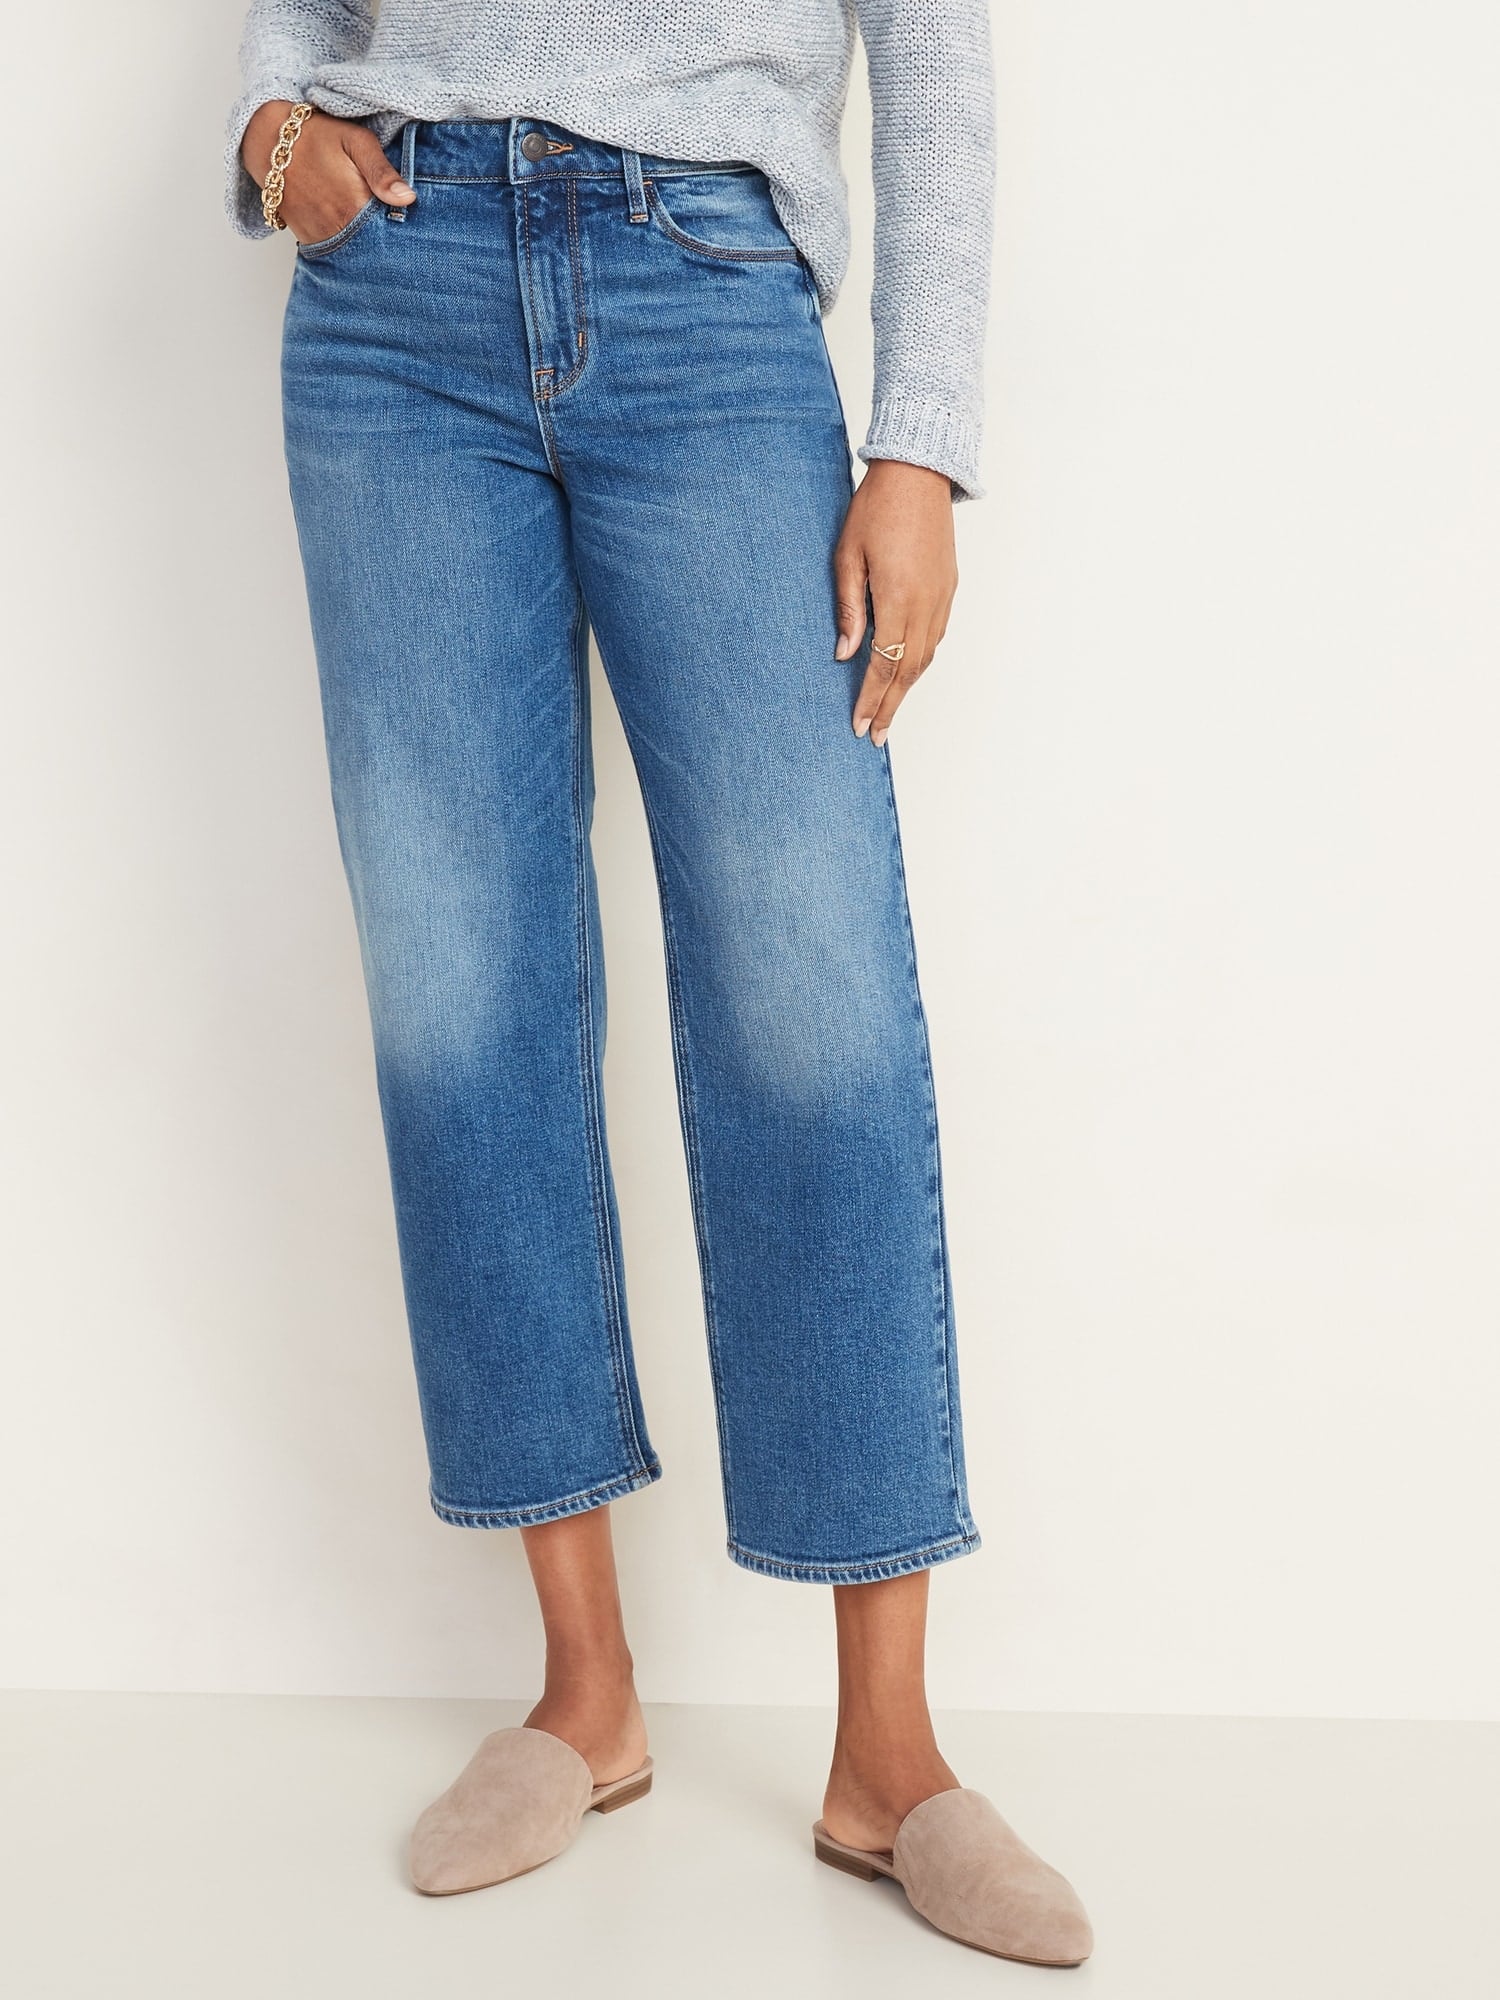 old navy smooth and slim jeans